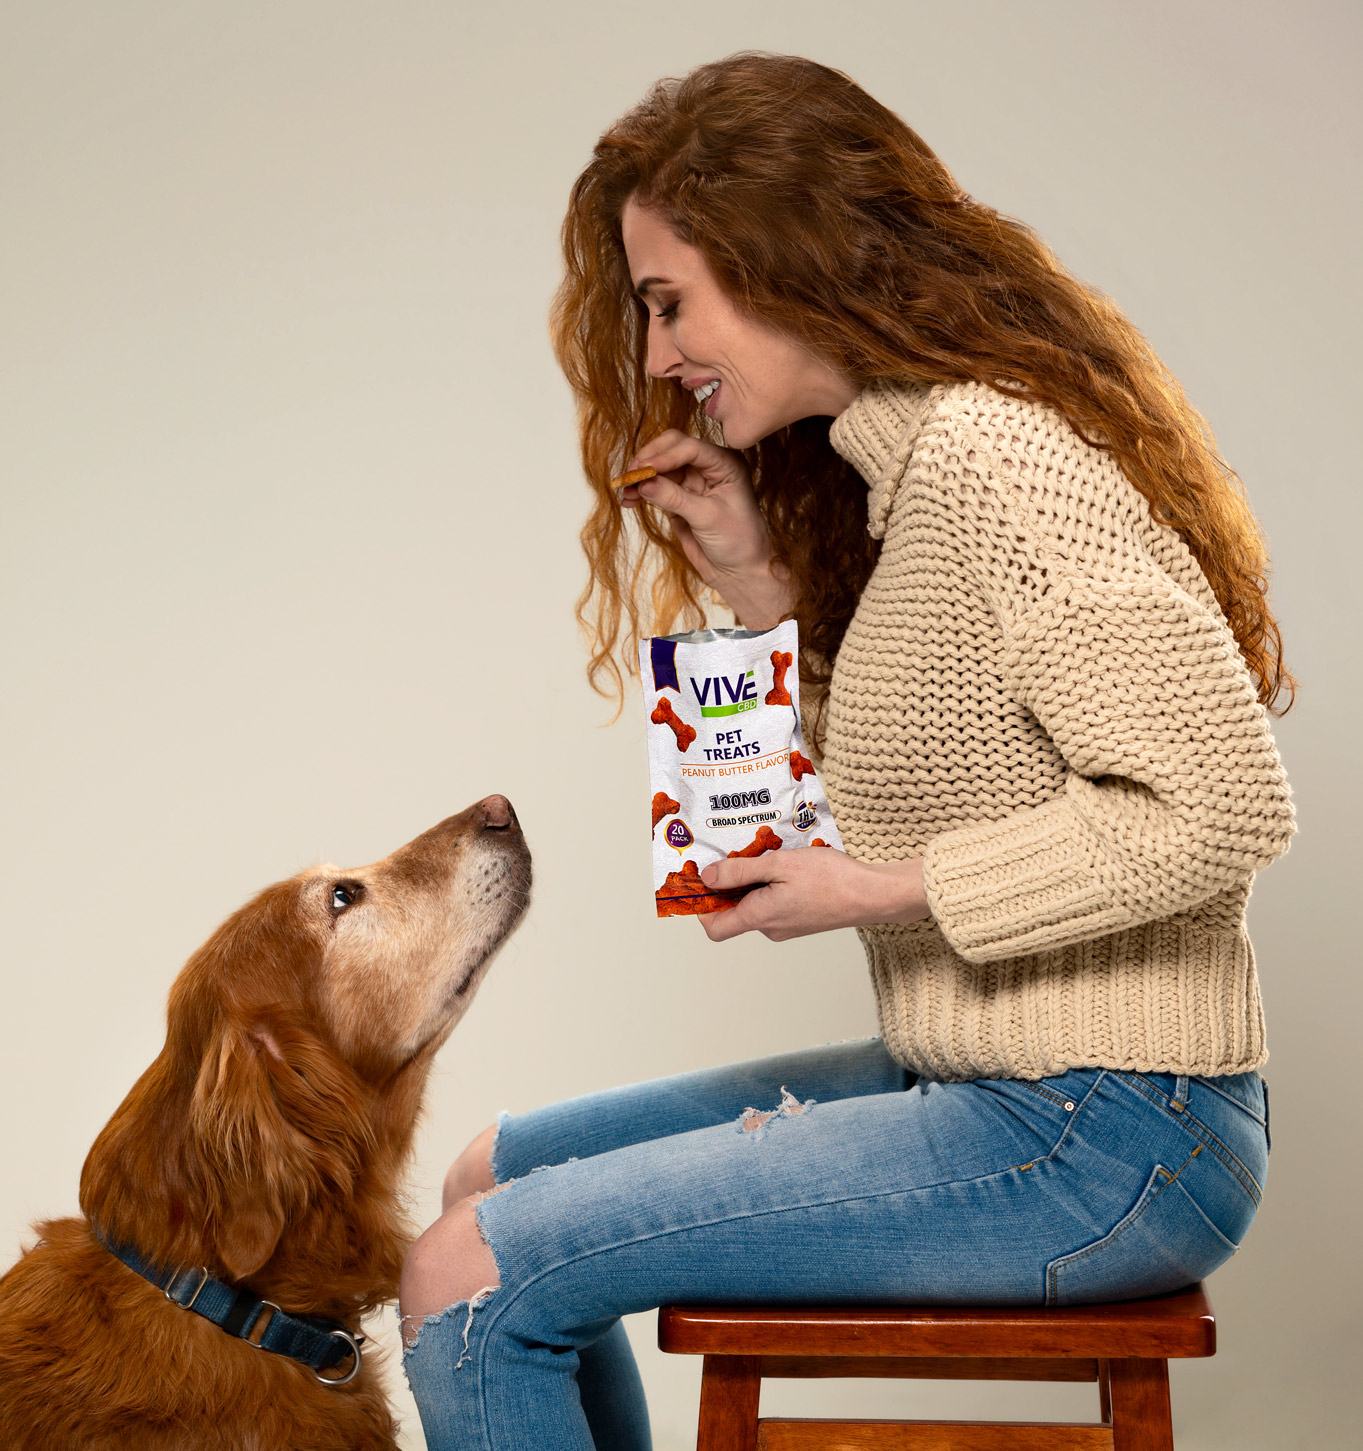 professional headshot advertising photo of a model with dog